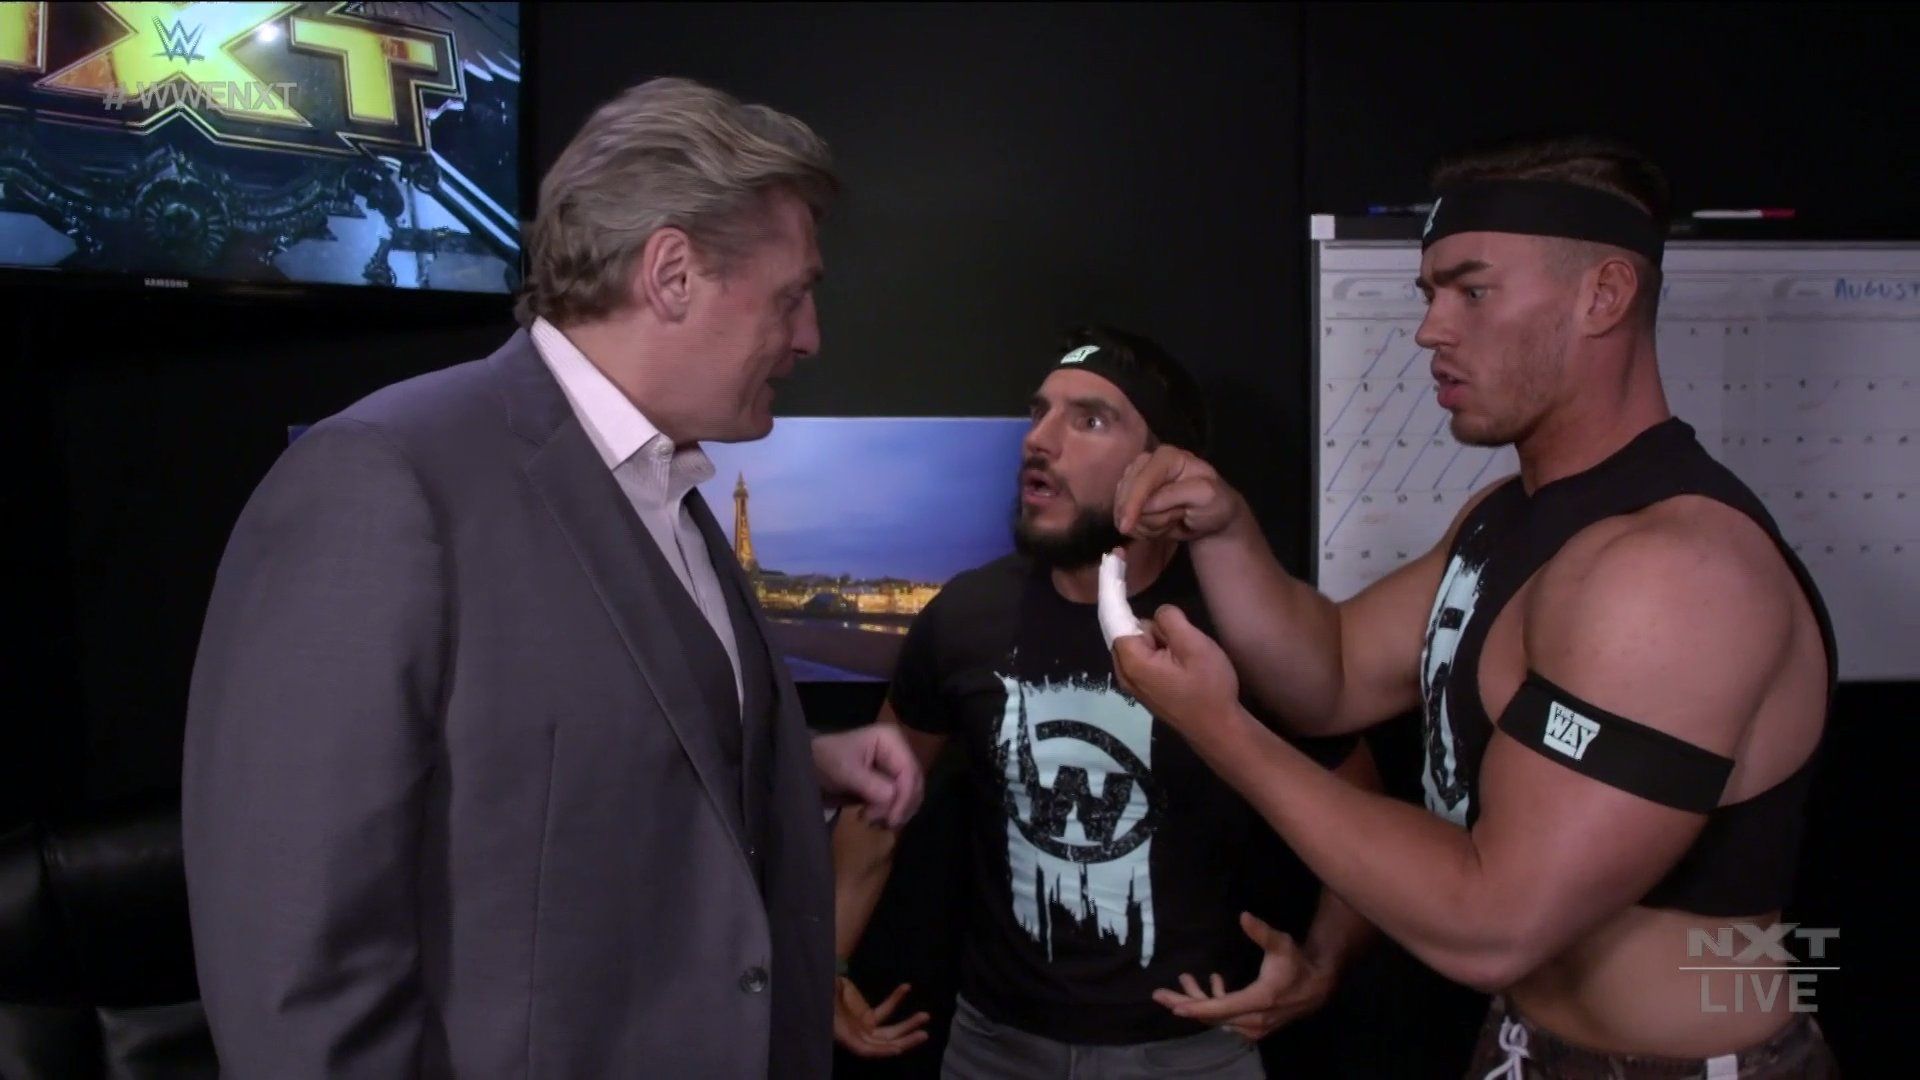 NXT General Manager William Regal with NXT Superstars Johnny Gargano and Austin Theory of The Way on NXT June 22, 2021